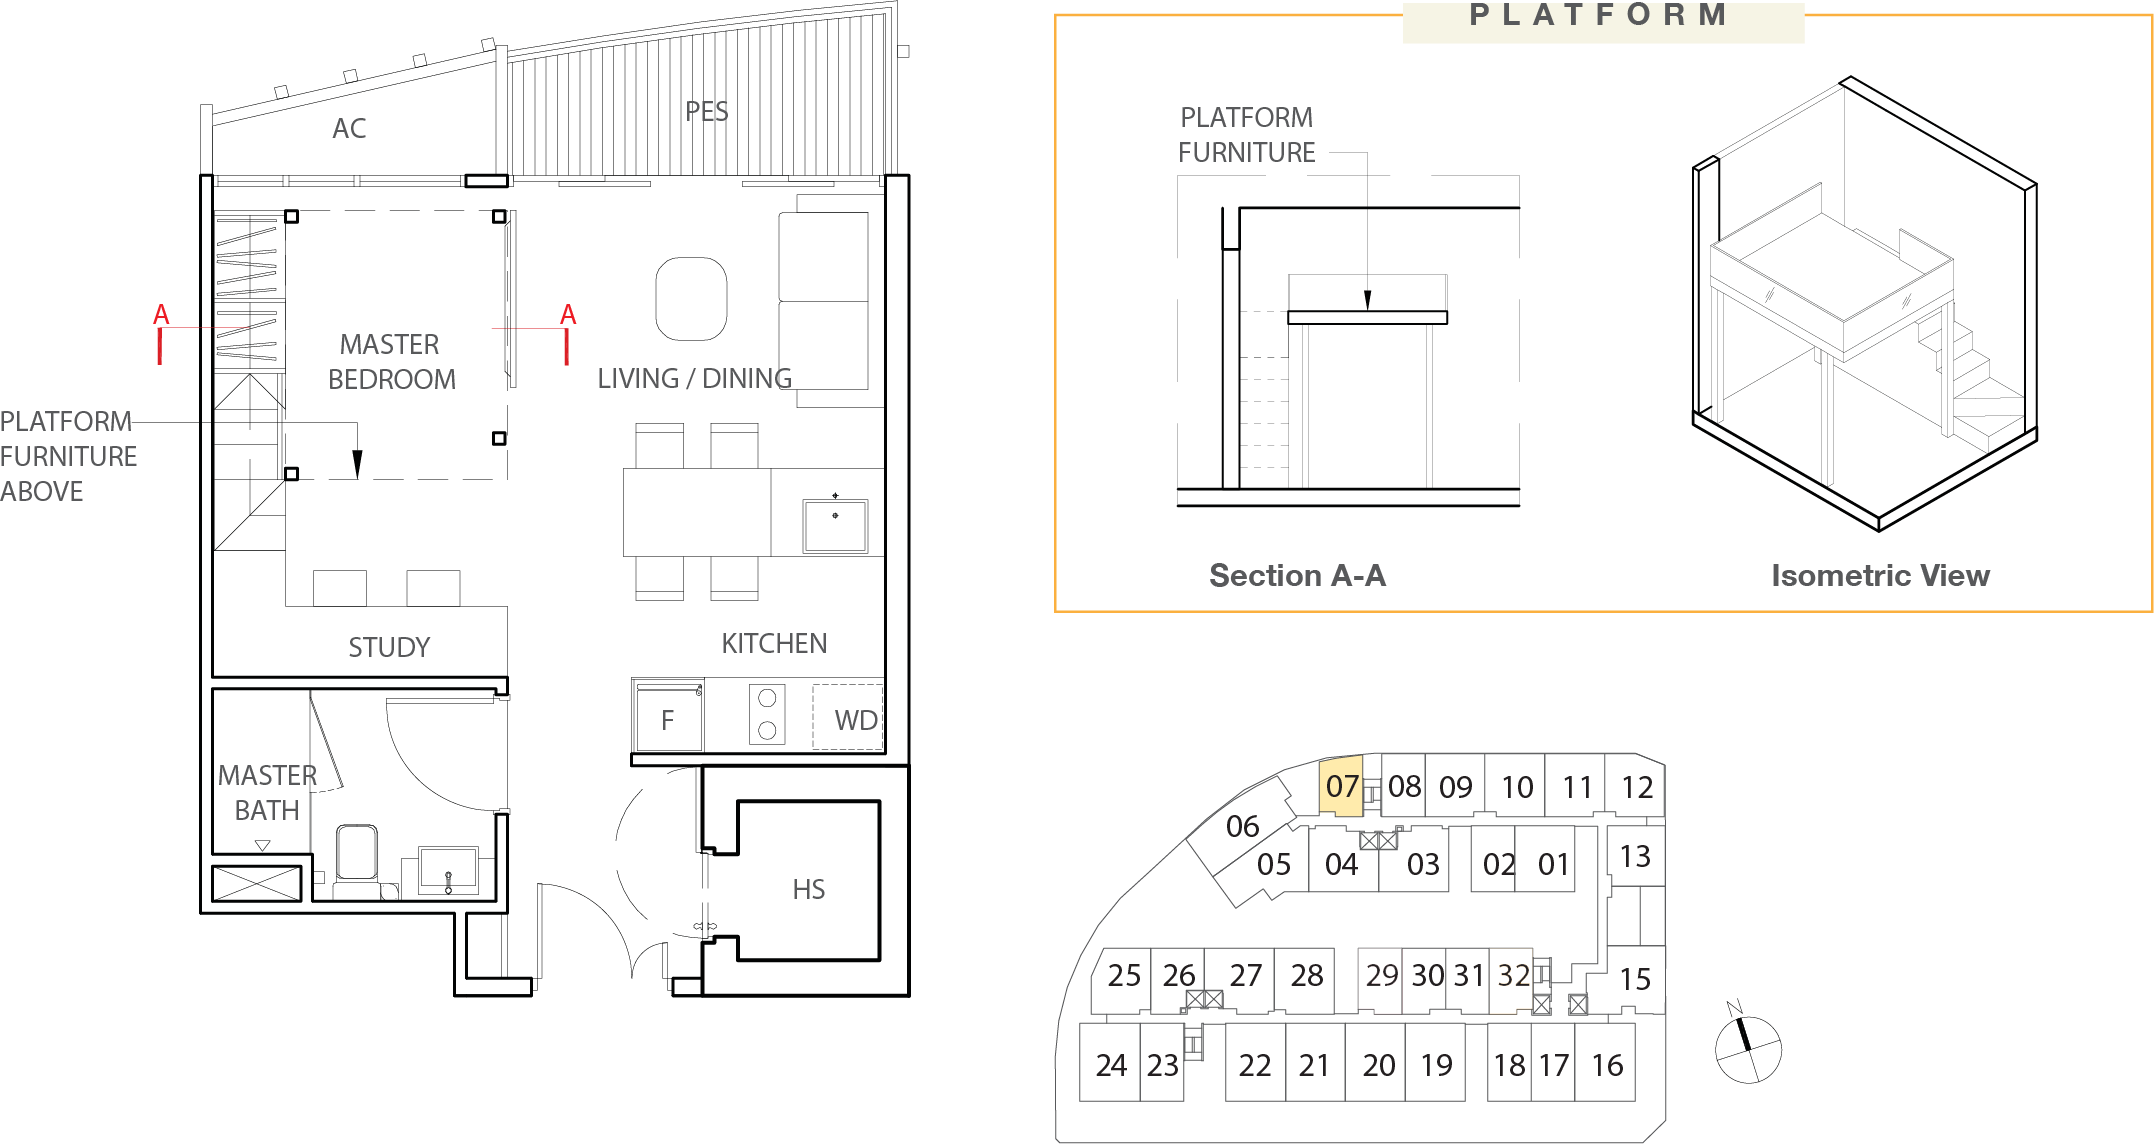 Floor Plan for Residential Type eA2-a